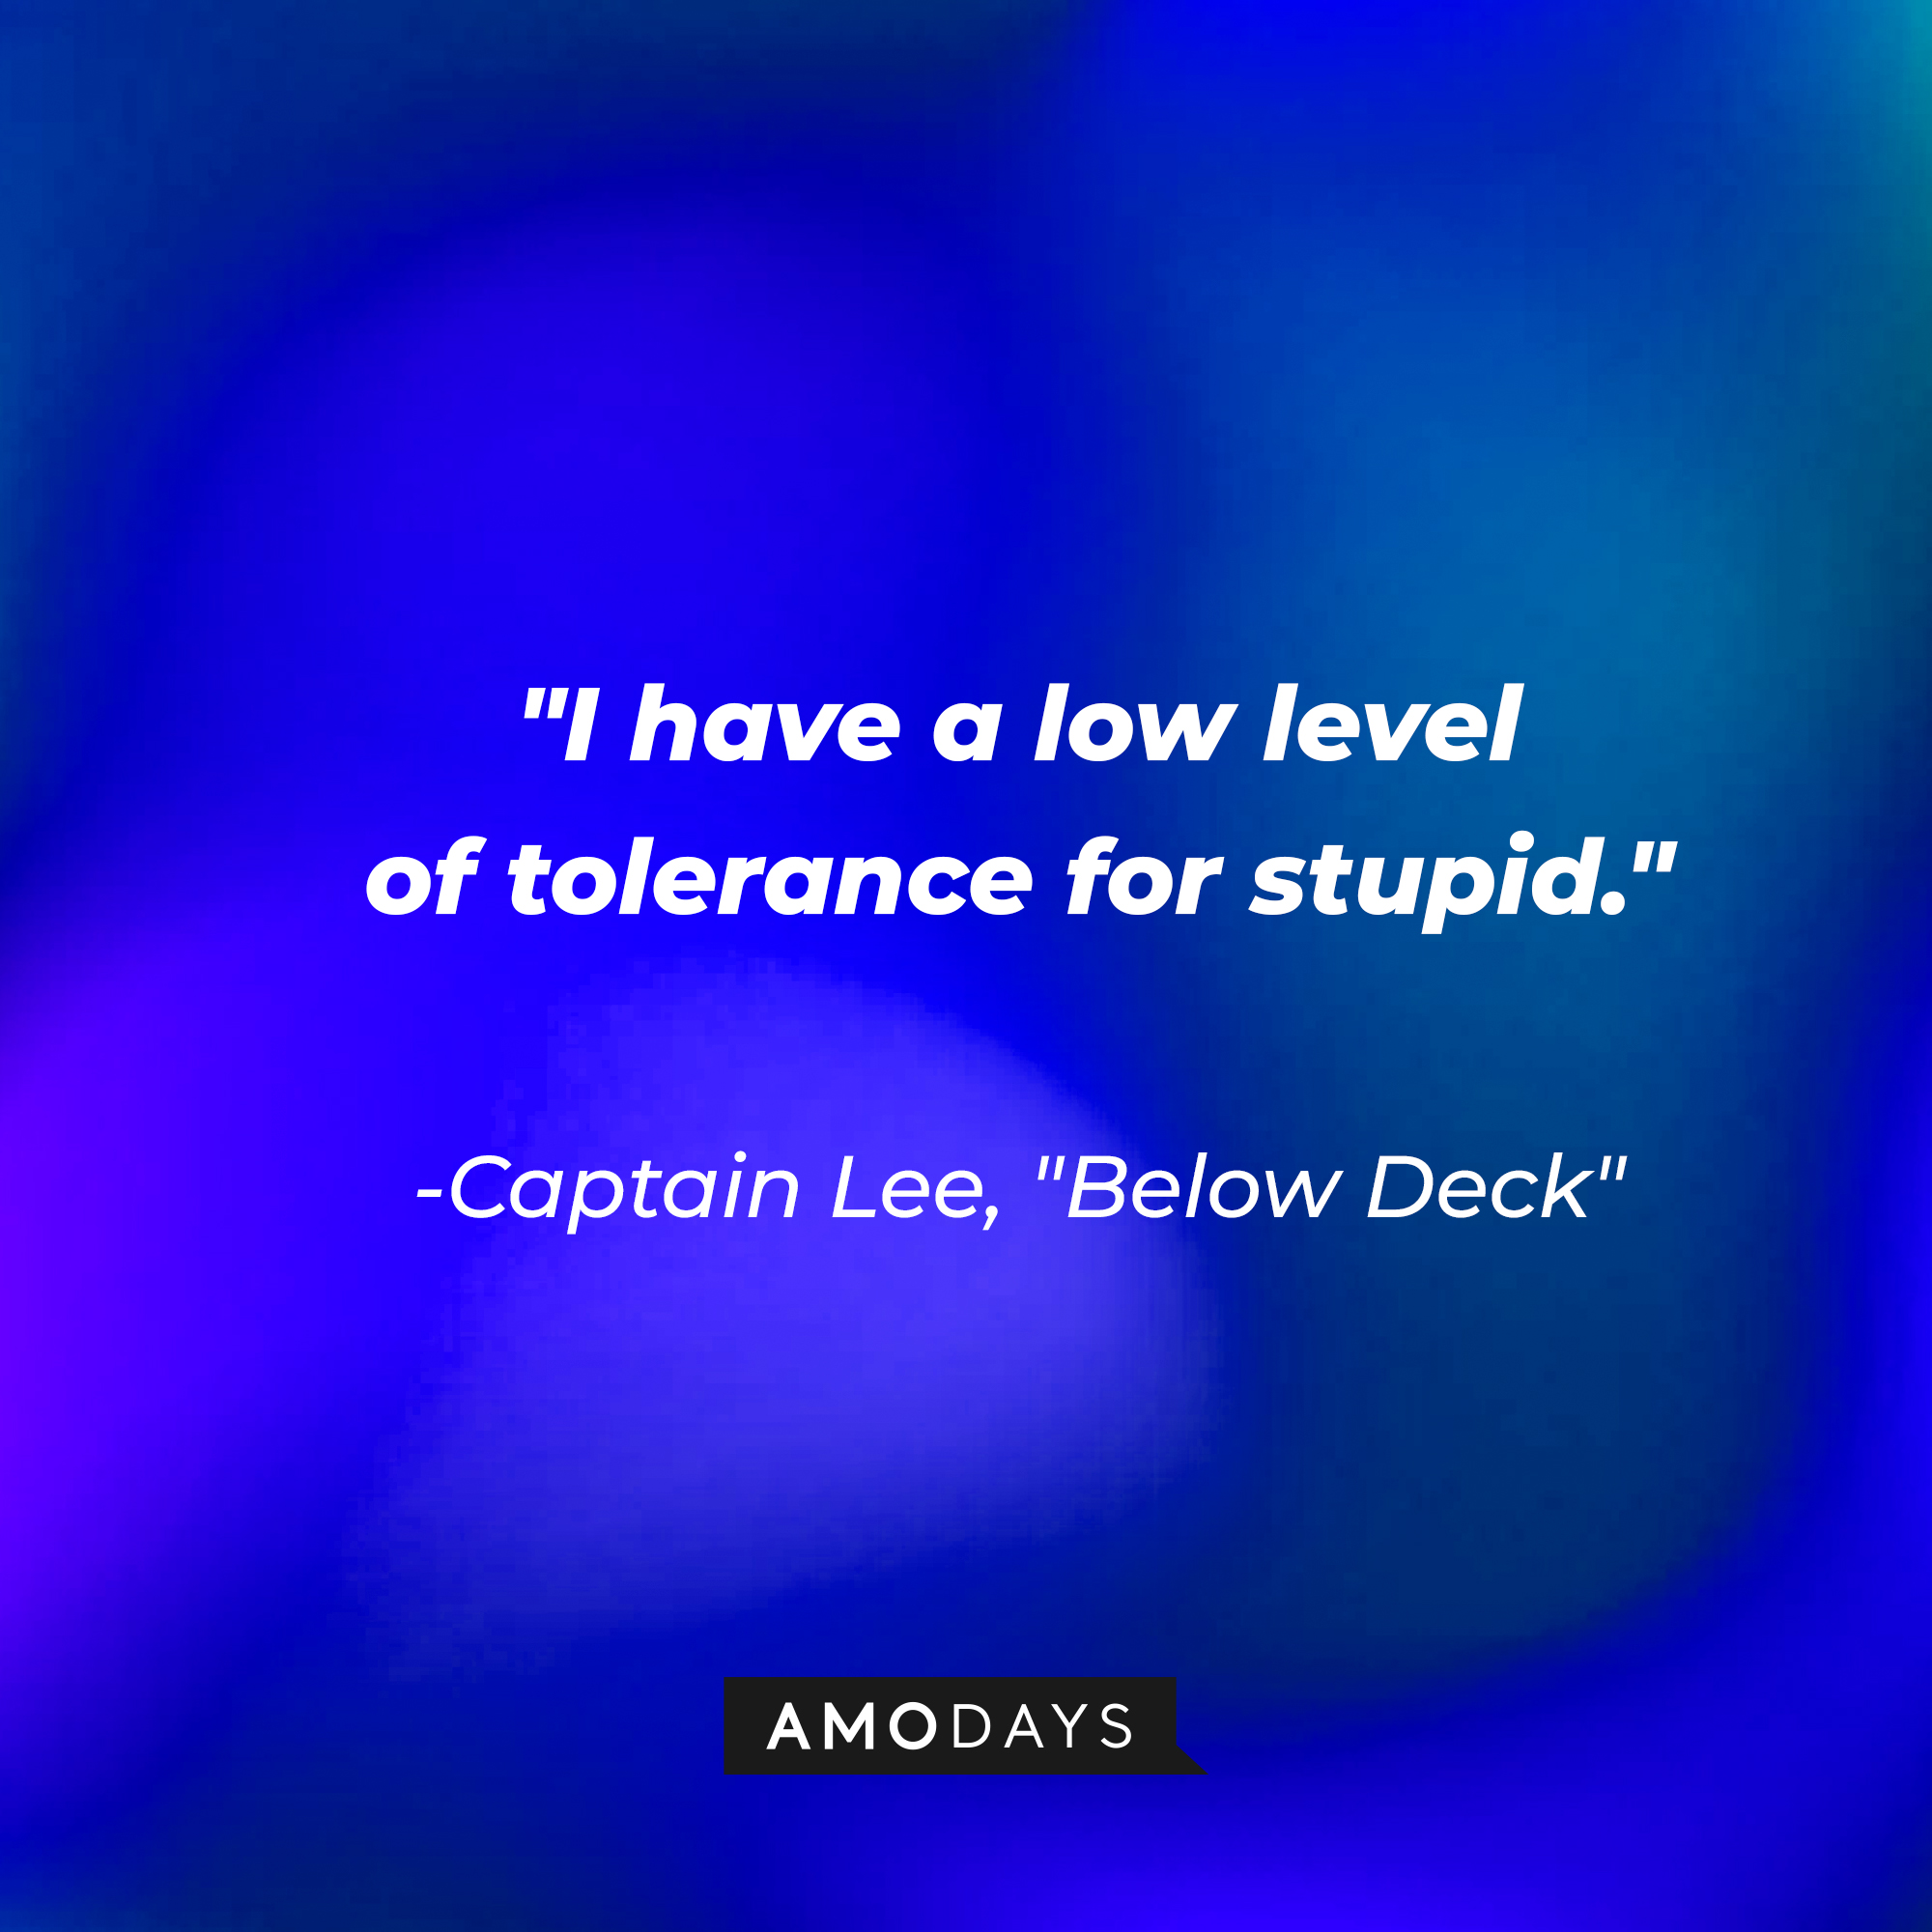 Captain Lee's quote from "Below Deck:" "I have a low level of tolerance for stupid." | Source: AmoDays